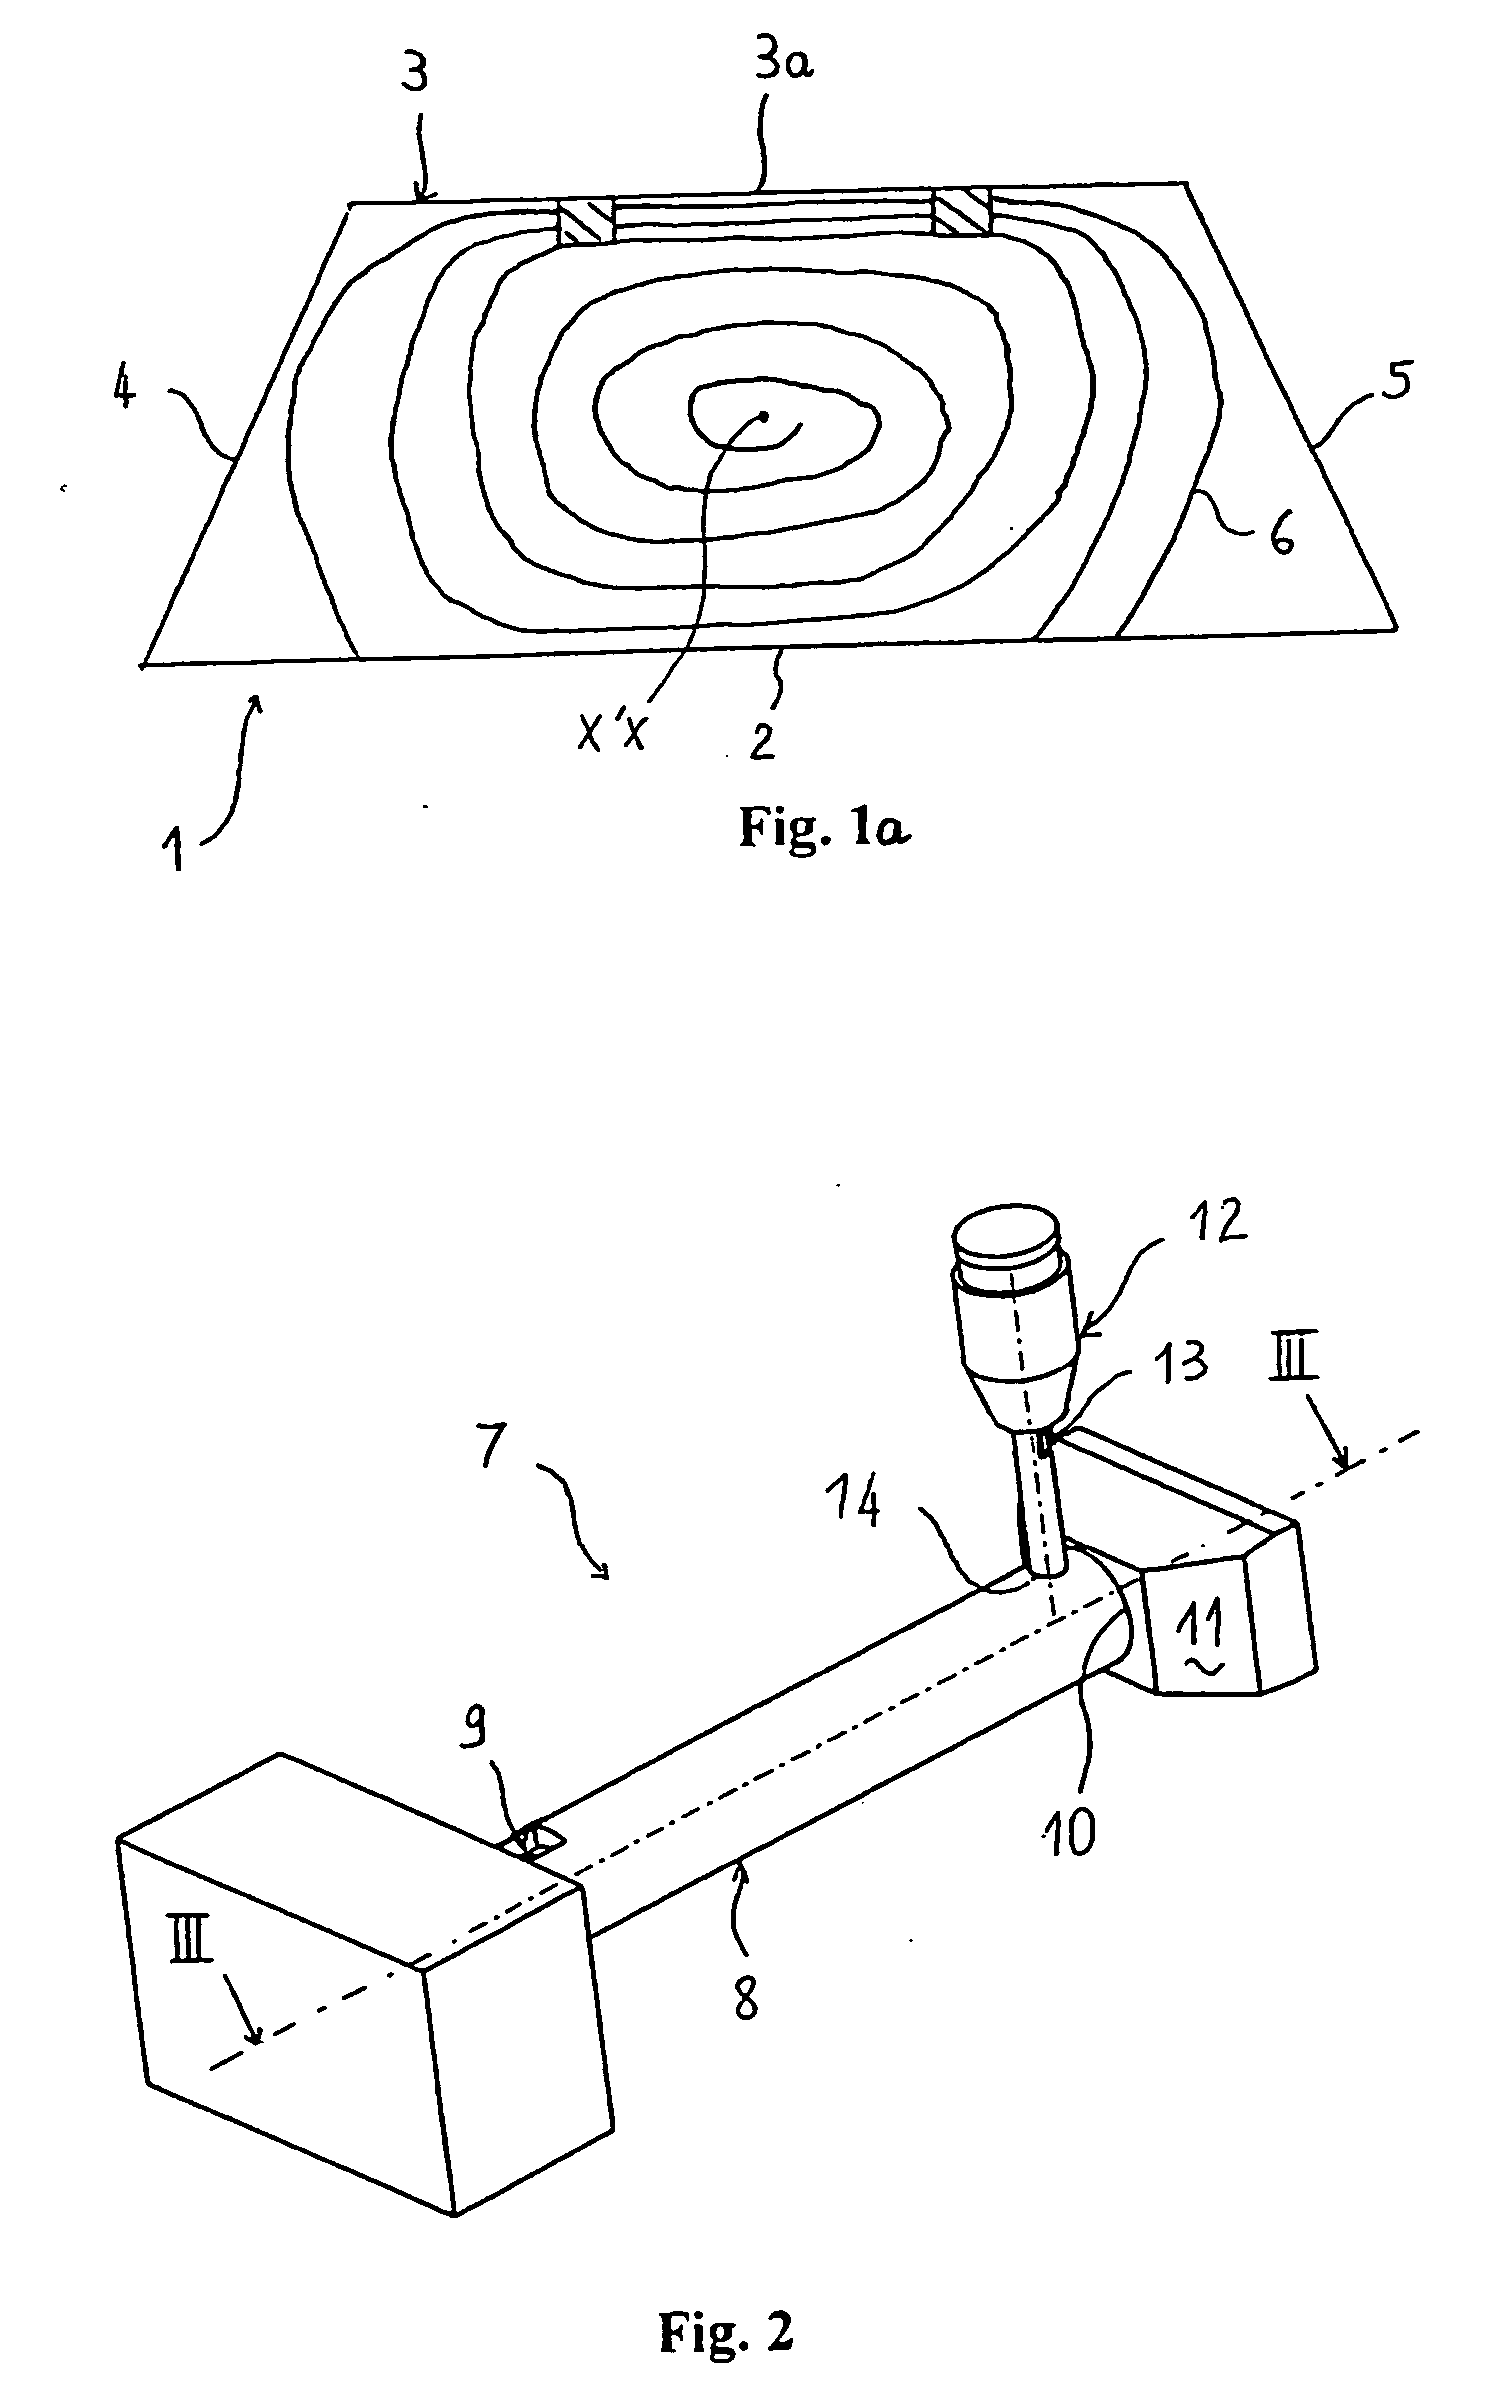 Extruded rubber profile, method for obtaining same and tire incorporating same